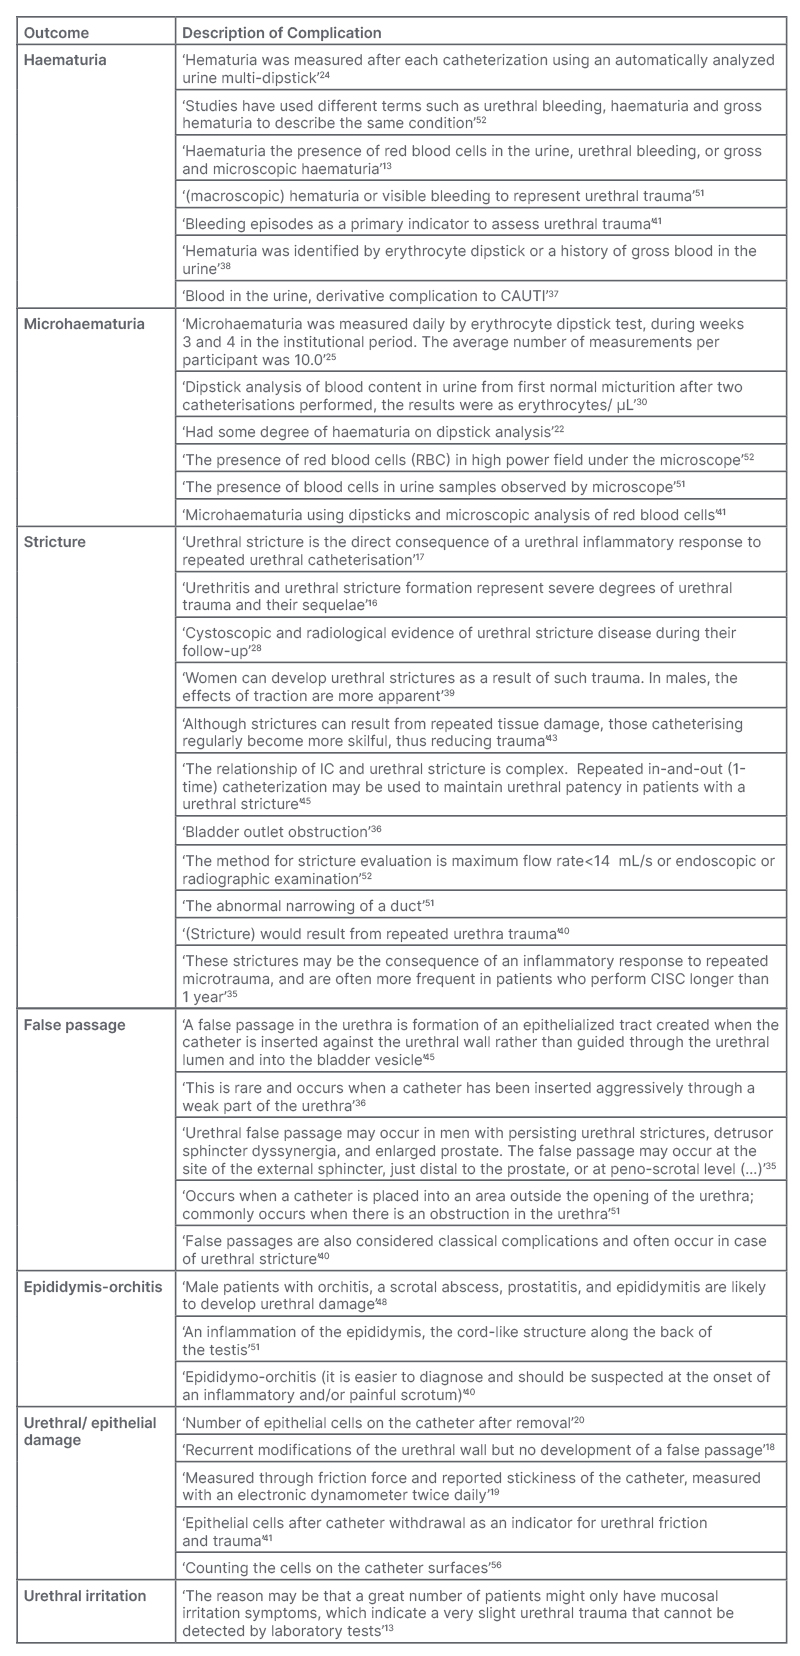 Table 1 Detailed definitions of complications associated with intermittent catheterisation as identified in the analysed article